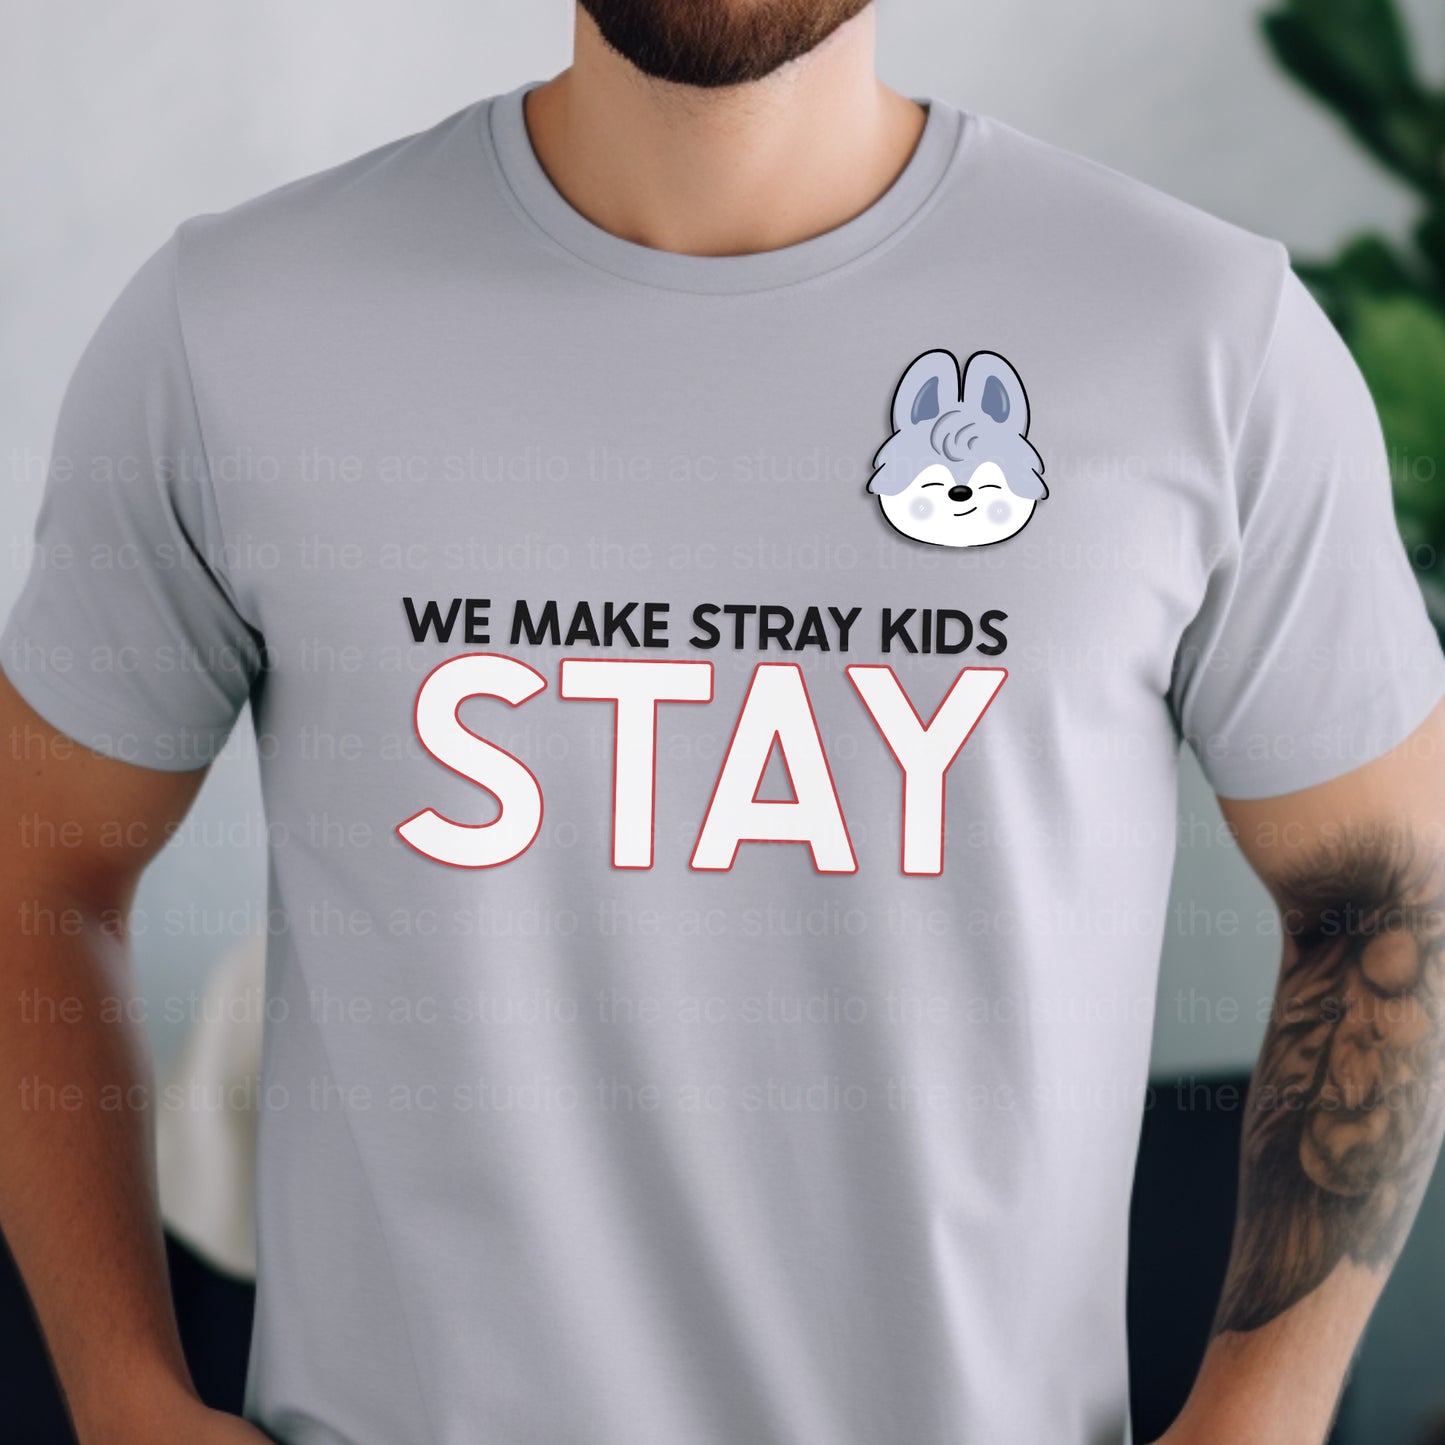 STAY - We Make SK Stay T-Shirt (Gray)